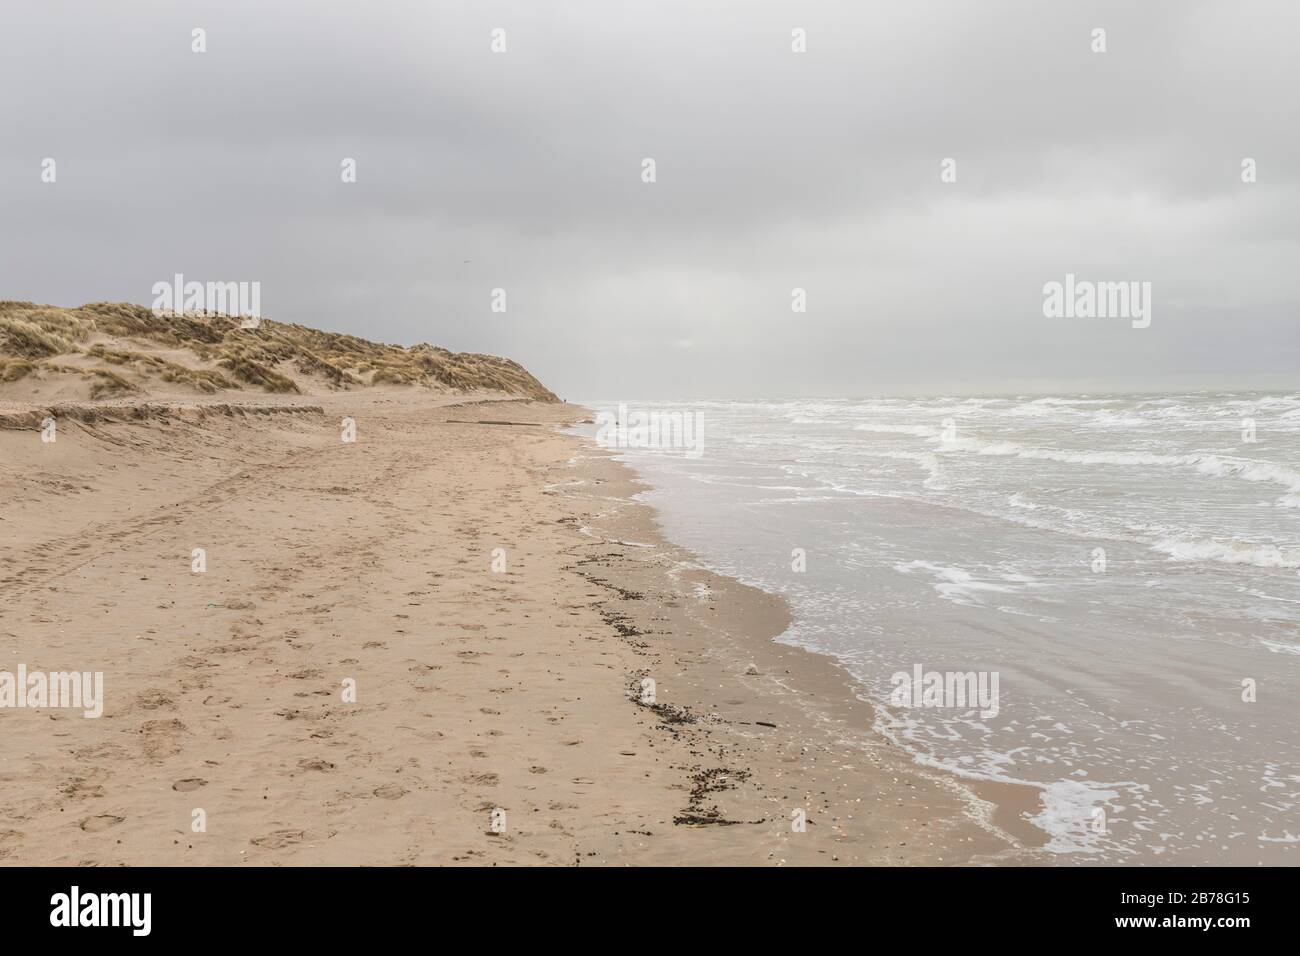 Koksijde,Belgium - February 26, 2020: The beach in a cold and windy day in winter Stock Photo